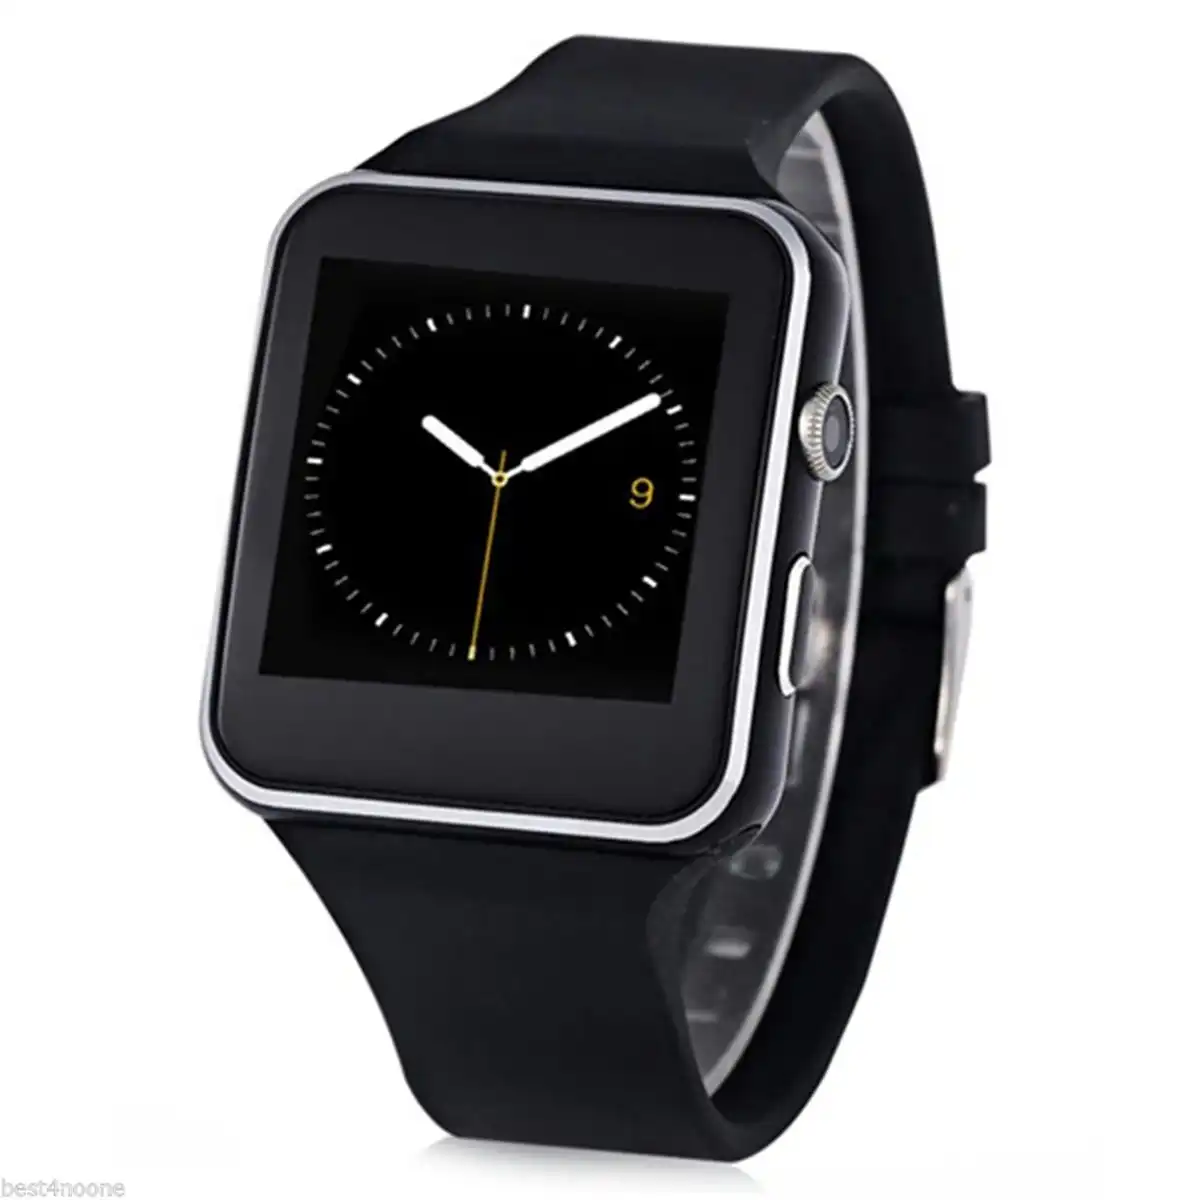 Bluetooth V3.0 Smart Watch 1.54" Ips Hd Lcd Rechargeable Handsfree Call - Black